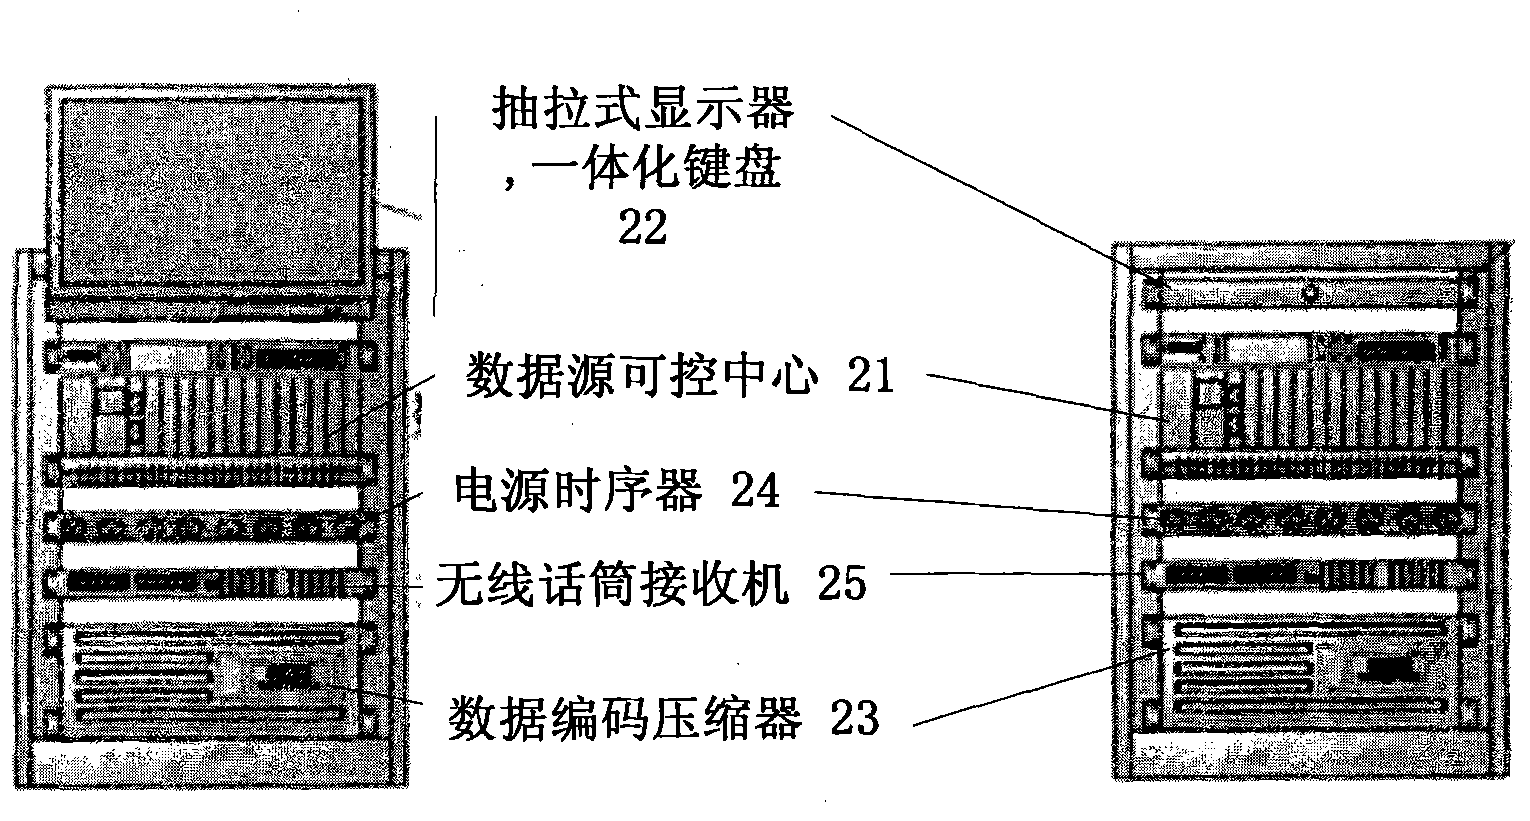 Integrated mobile recording and broadcasting system